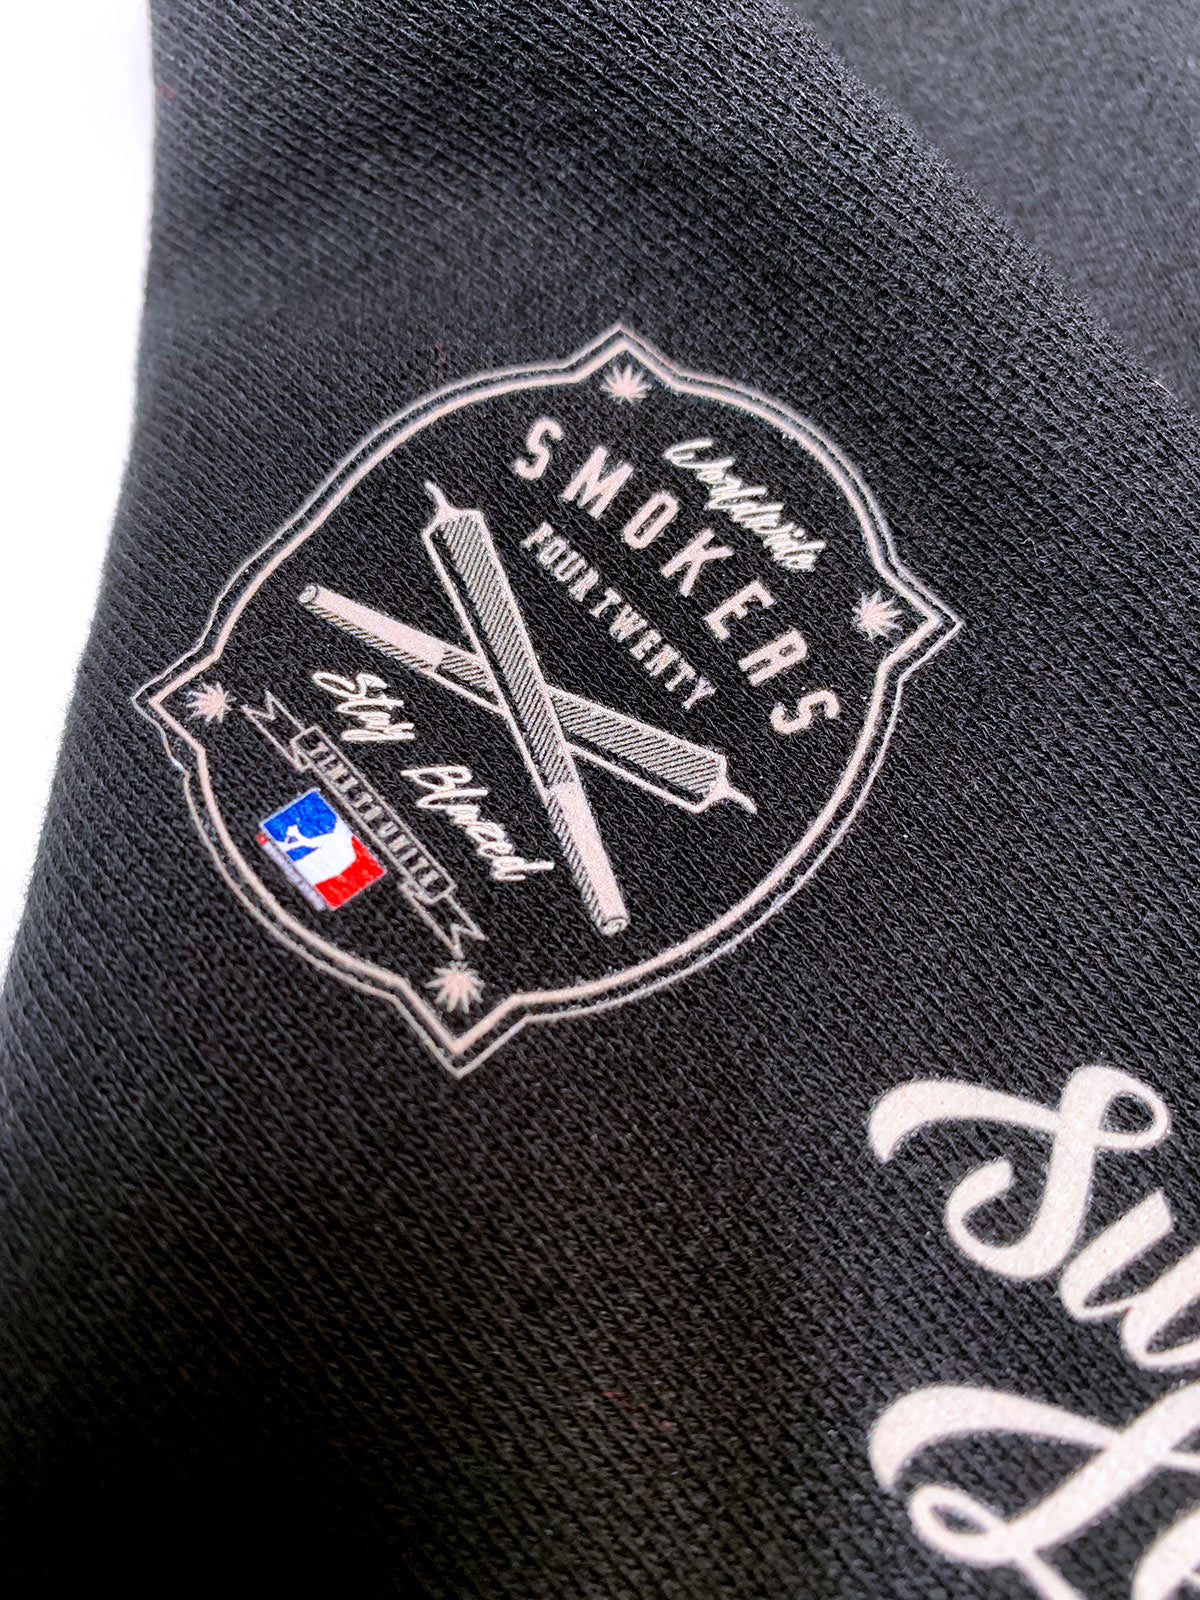 Close-up of StonerDays Customized Mls All Stars Hoodie sleeve with embroidered logo